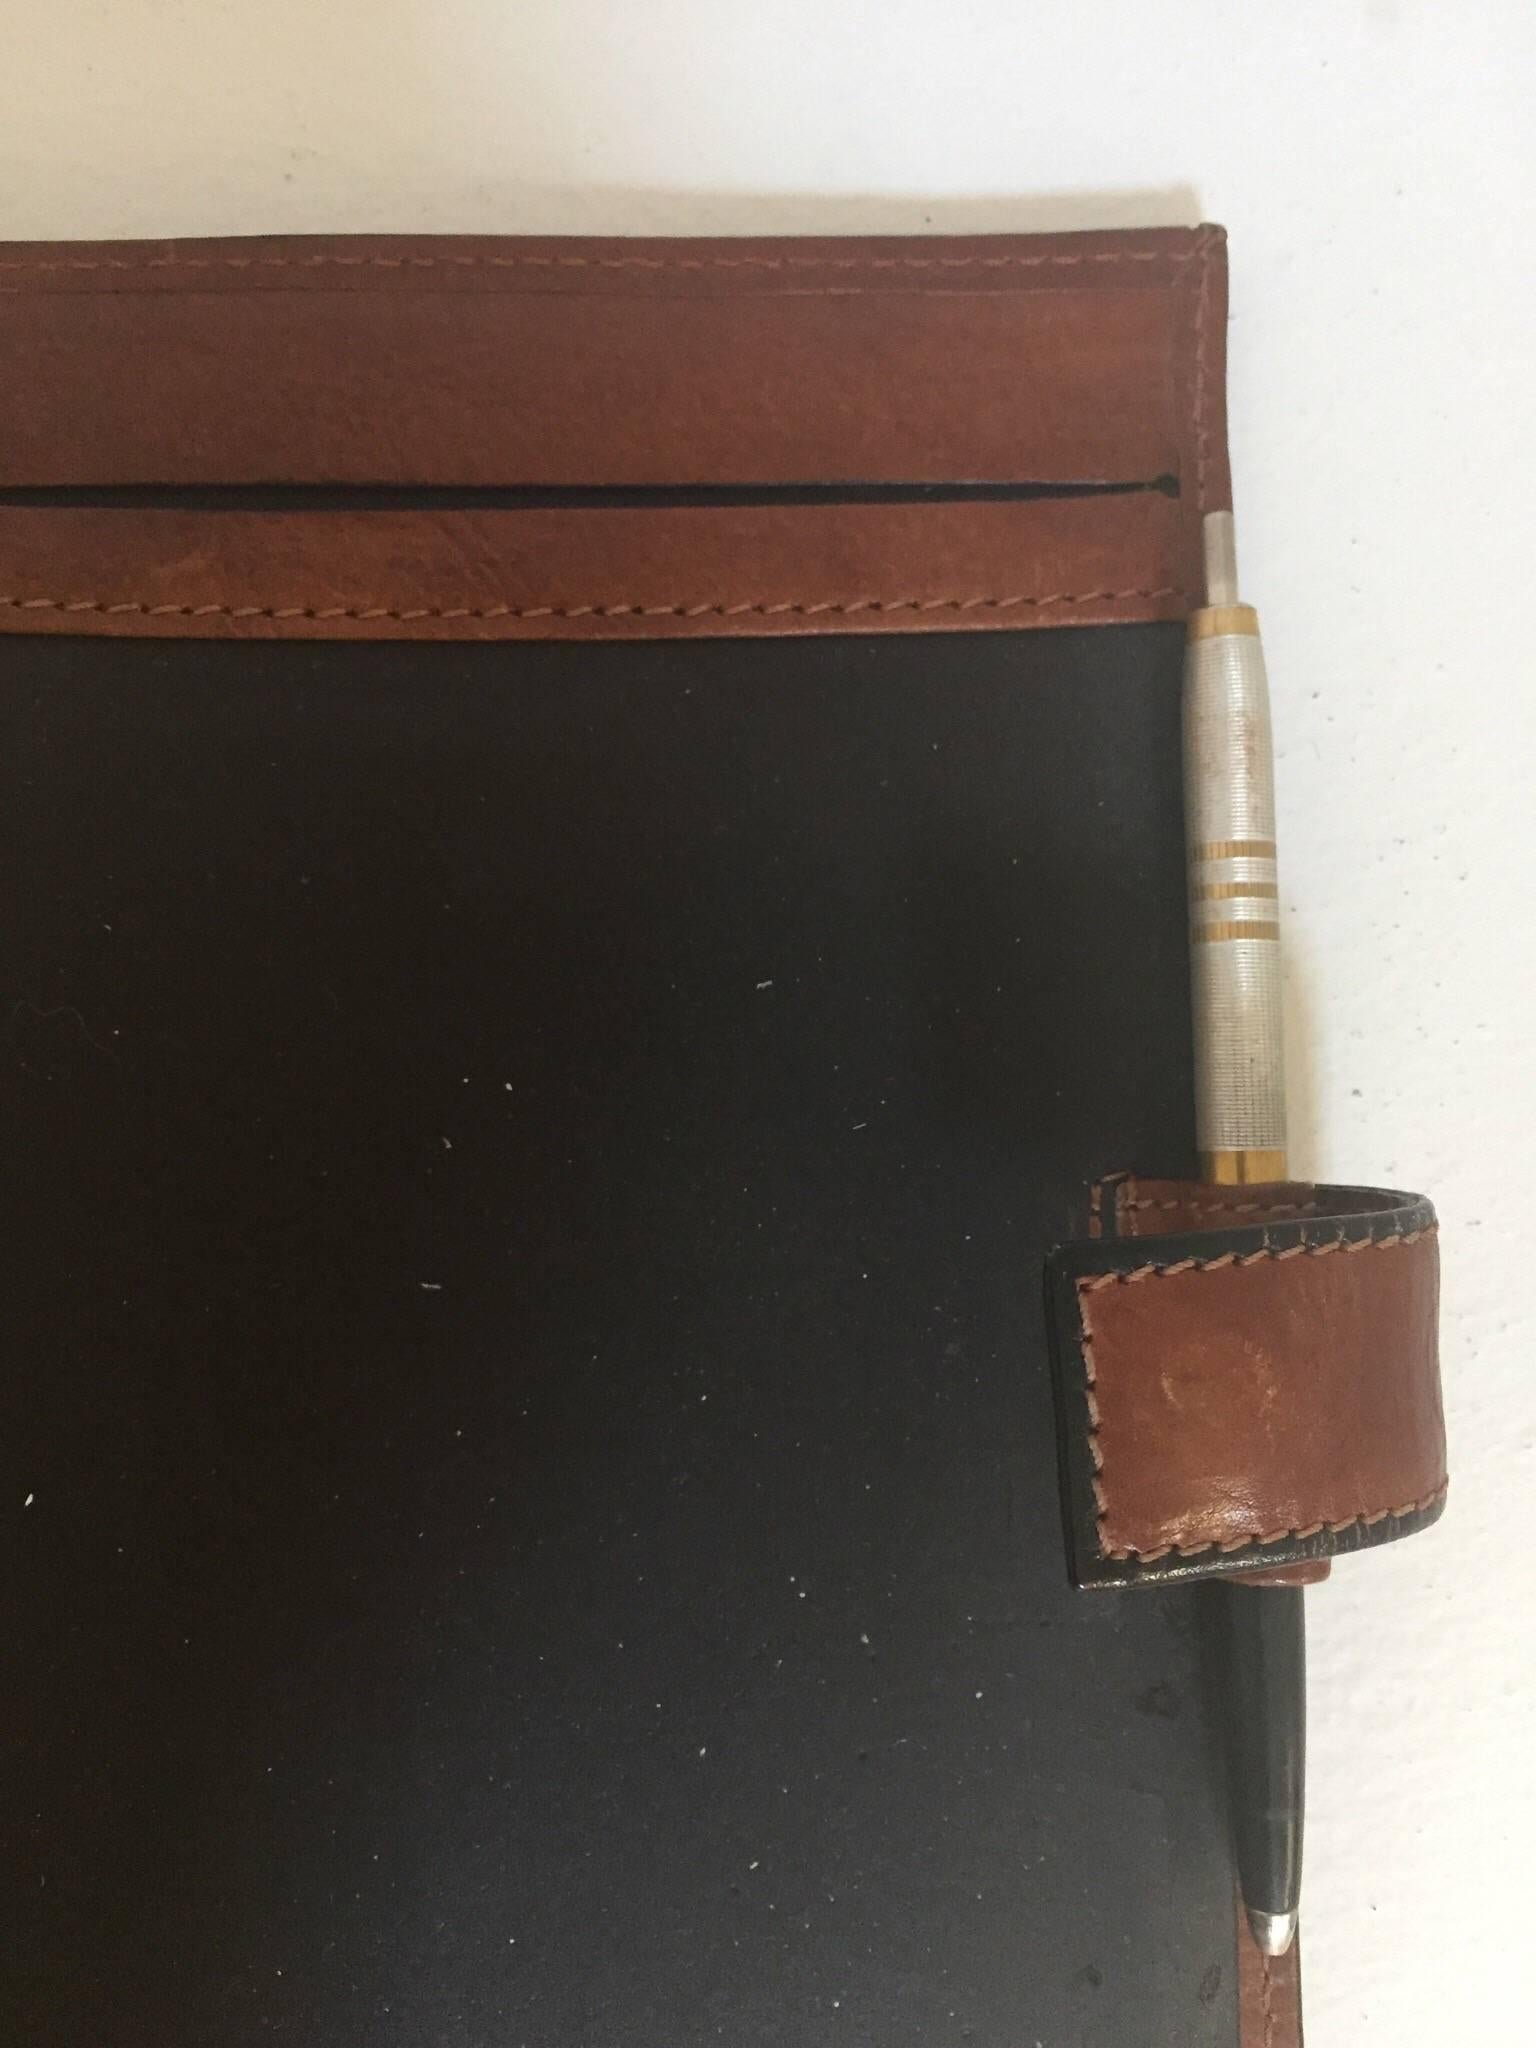 American Vintage Leather Stitched Agenda Refillable by Tumi For Sale